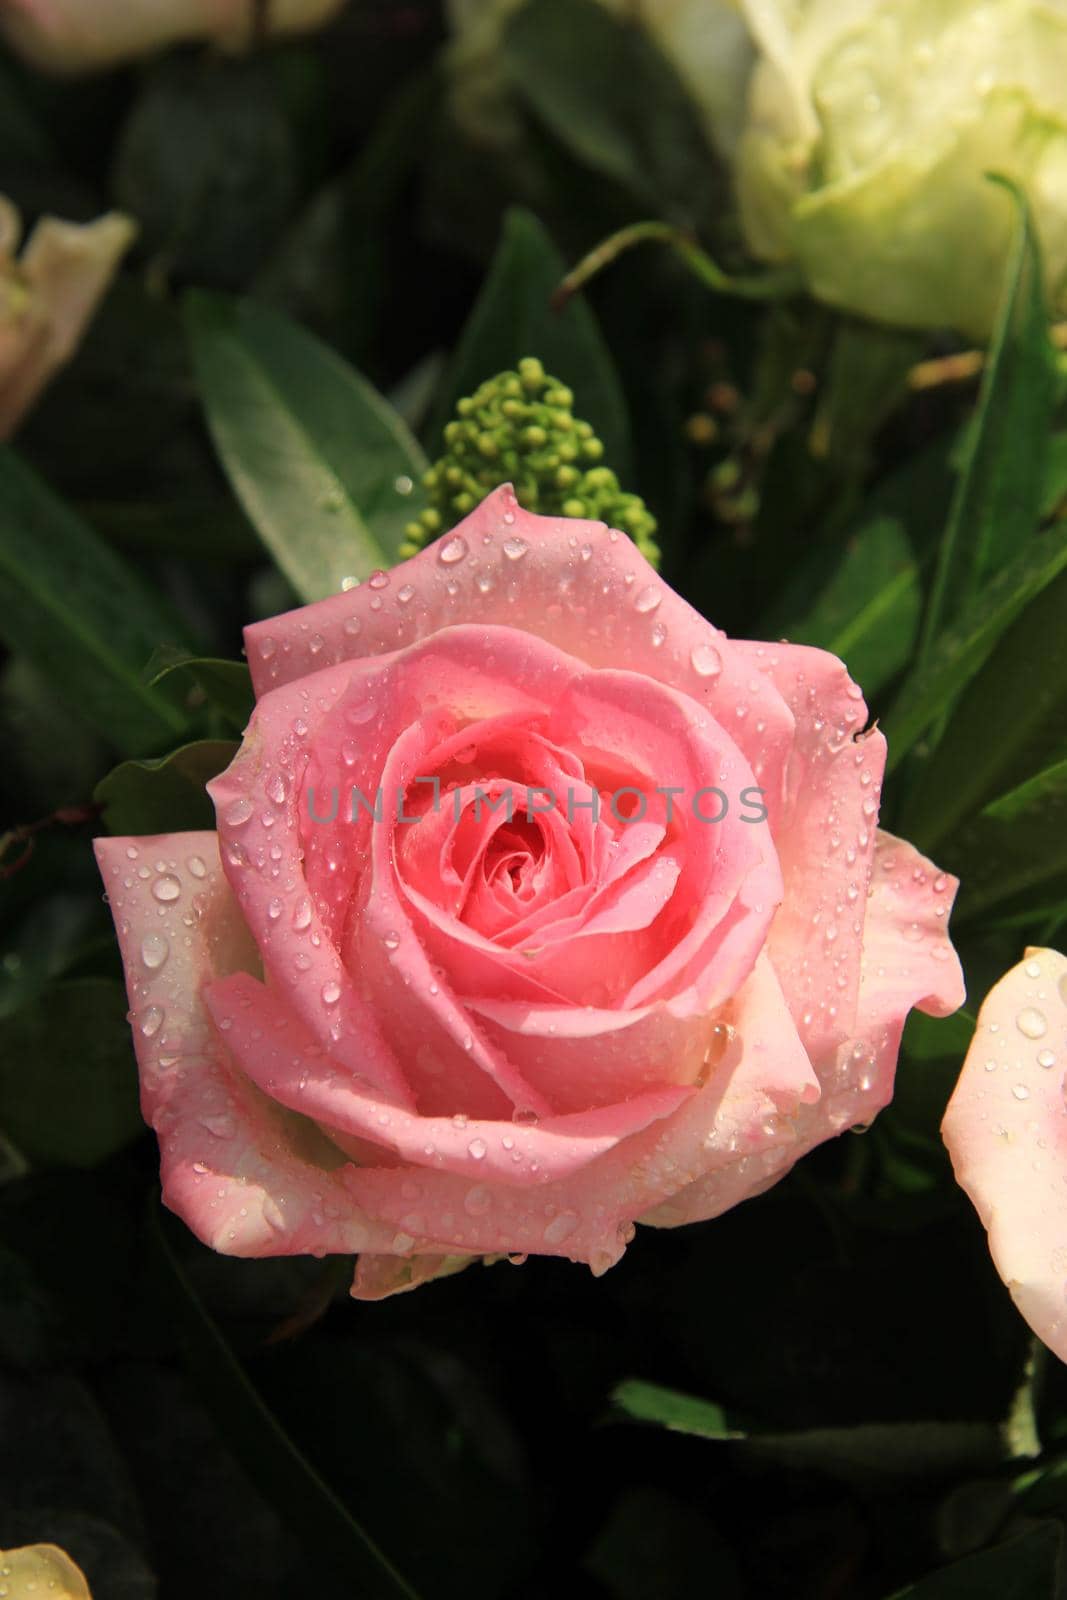 Big pink rose with water drops after a rainshower